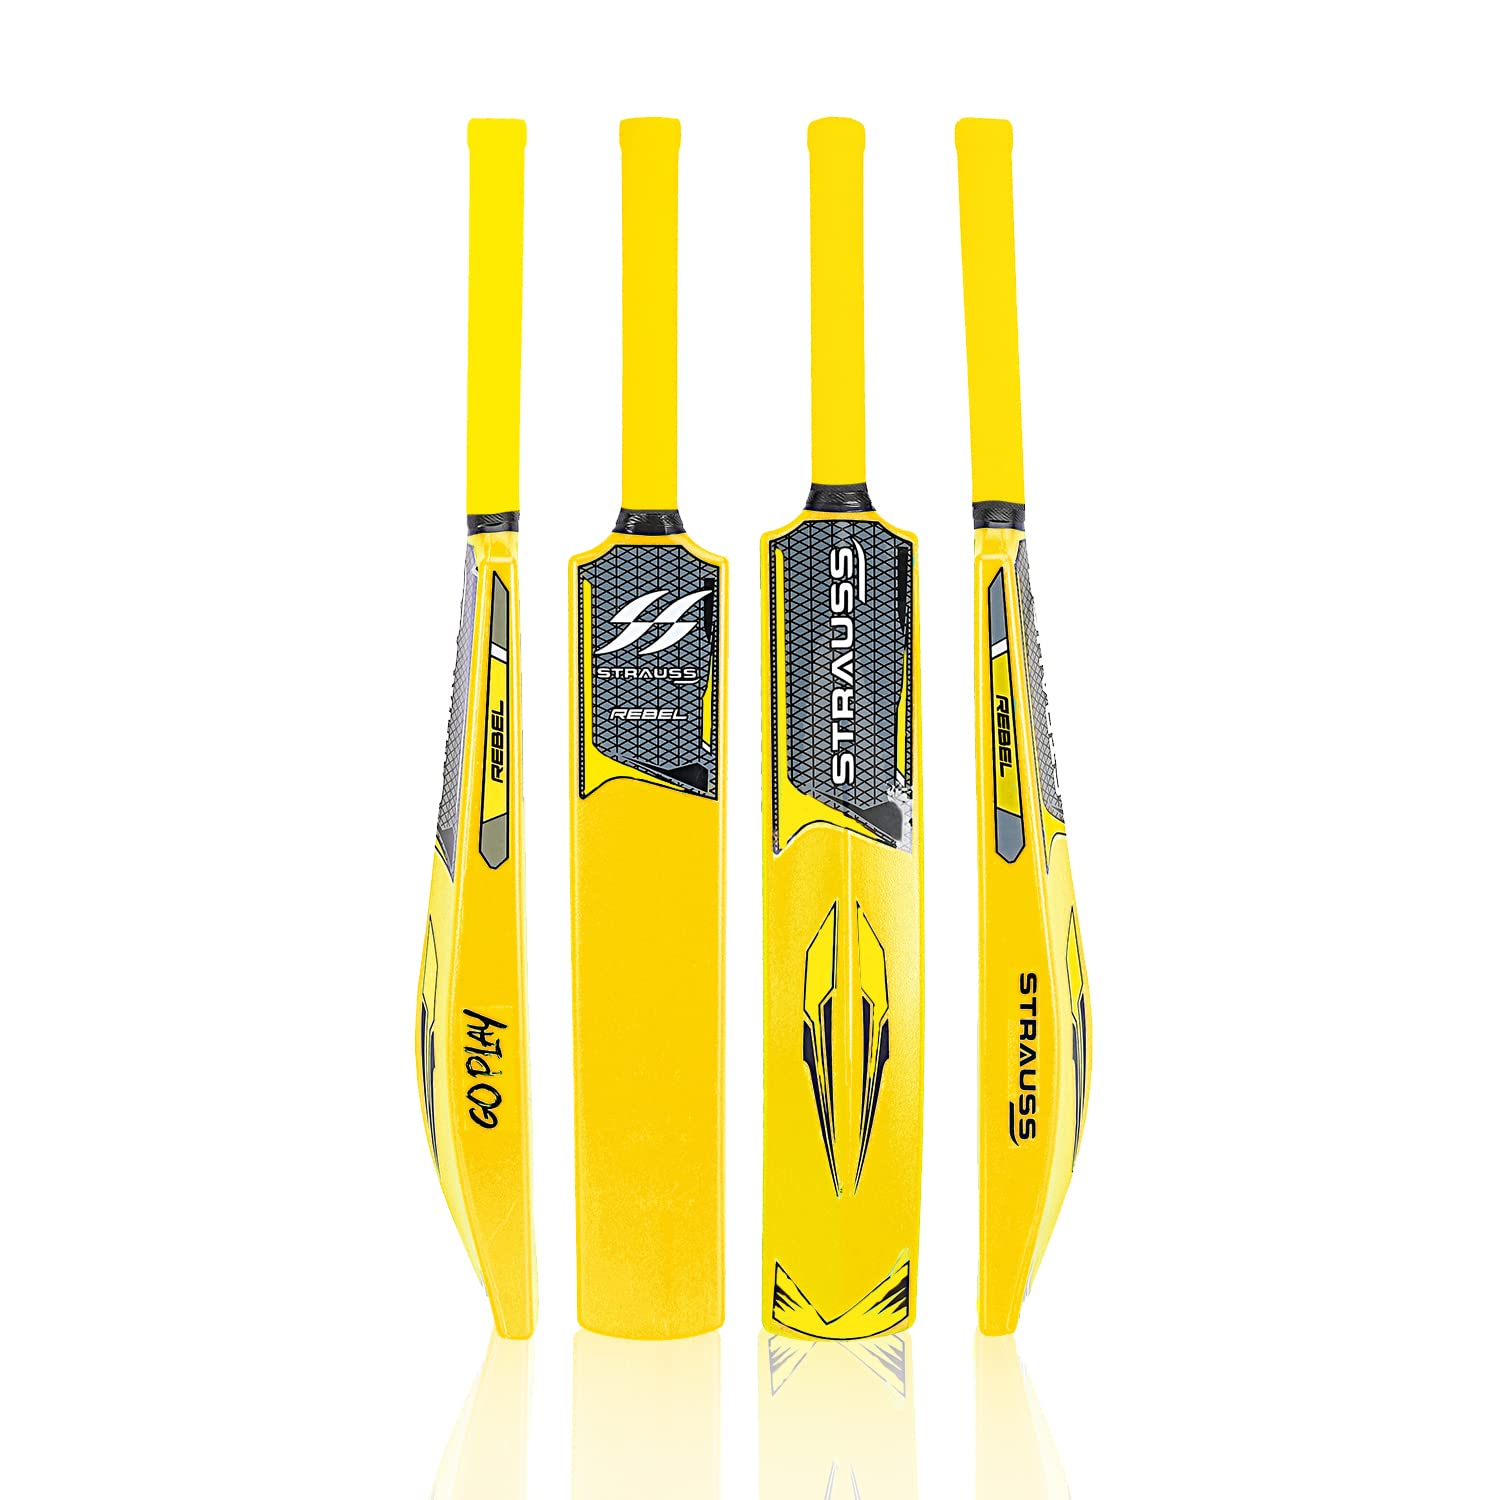 Strauss Rebel Cricket Bat | Full Size | Dimensions: 34 X 4.5 inch | Heavy Duty Hard PVC/Plastic Cricket Bat | Color: Golden Yellow | For All Age Groups | Tennis & Synthetic Ball Cricket Bat | Tennis Cricket Bat